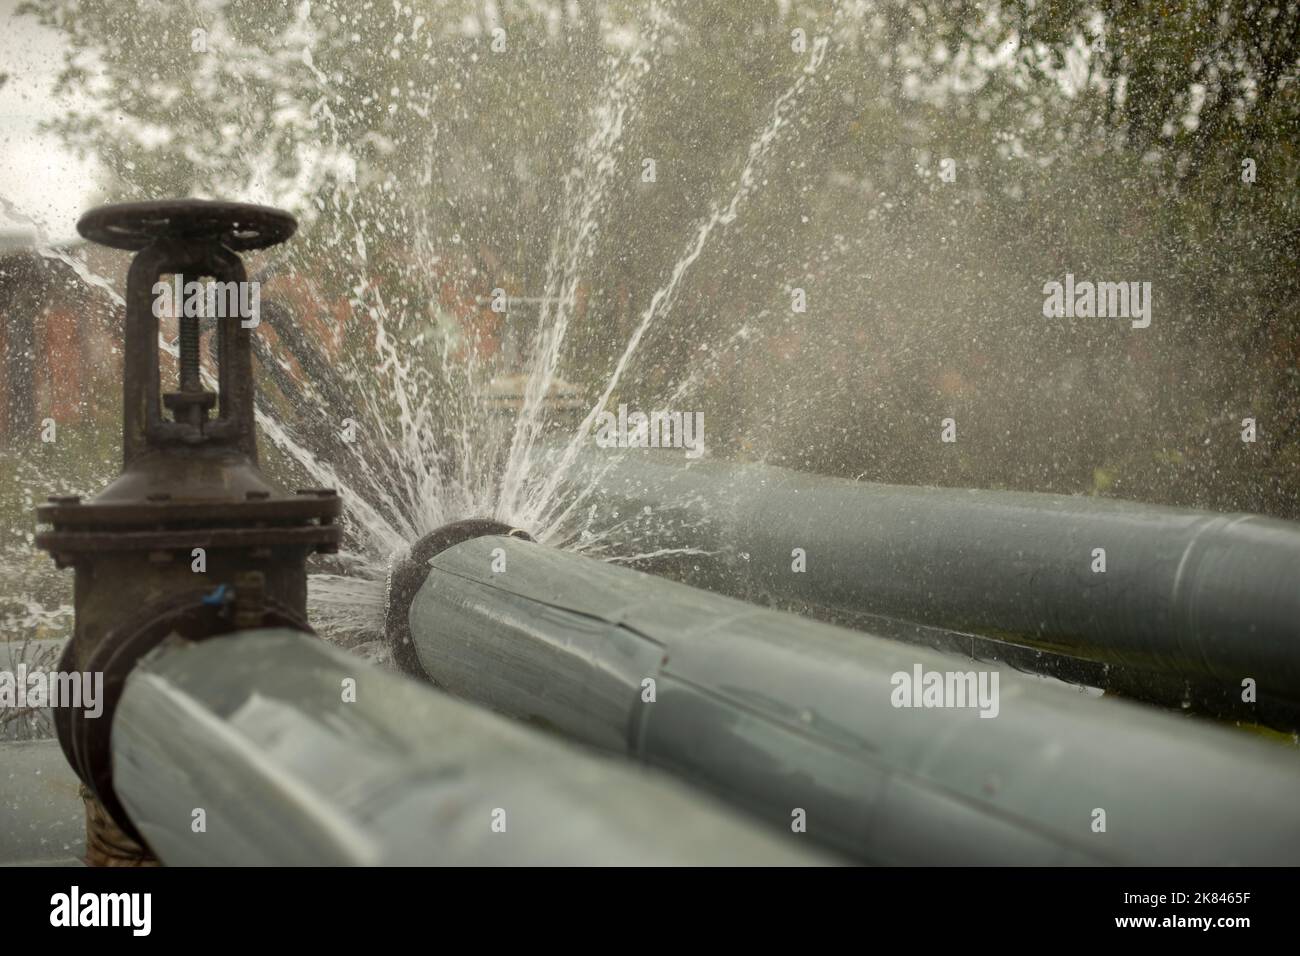 Breakthrough heating pipe. Pipeline accident. Boiling water pours out. Loss of tightness. Stock Photo